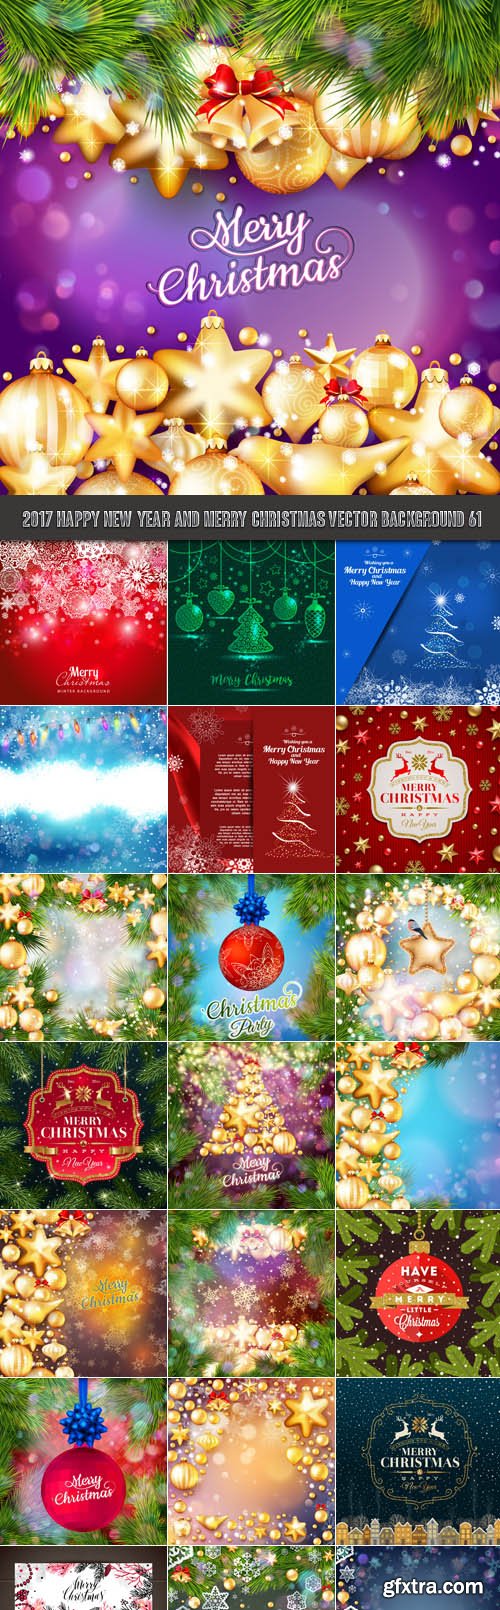 2017 Happy New Year and Merry Christmas vector background 61